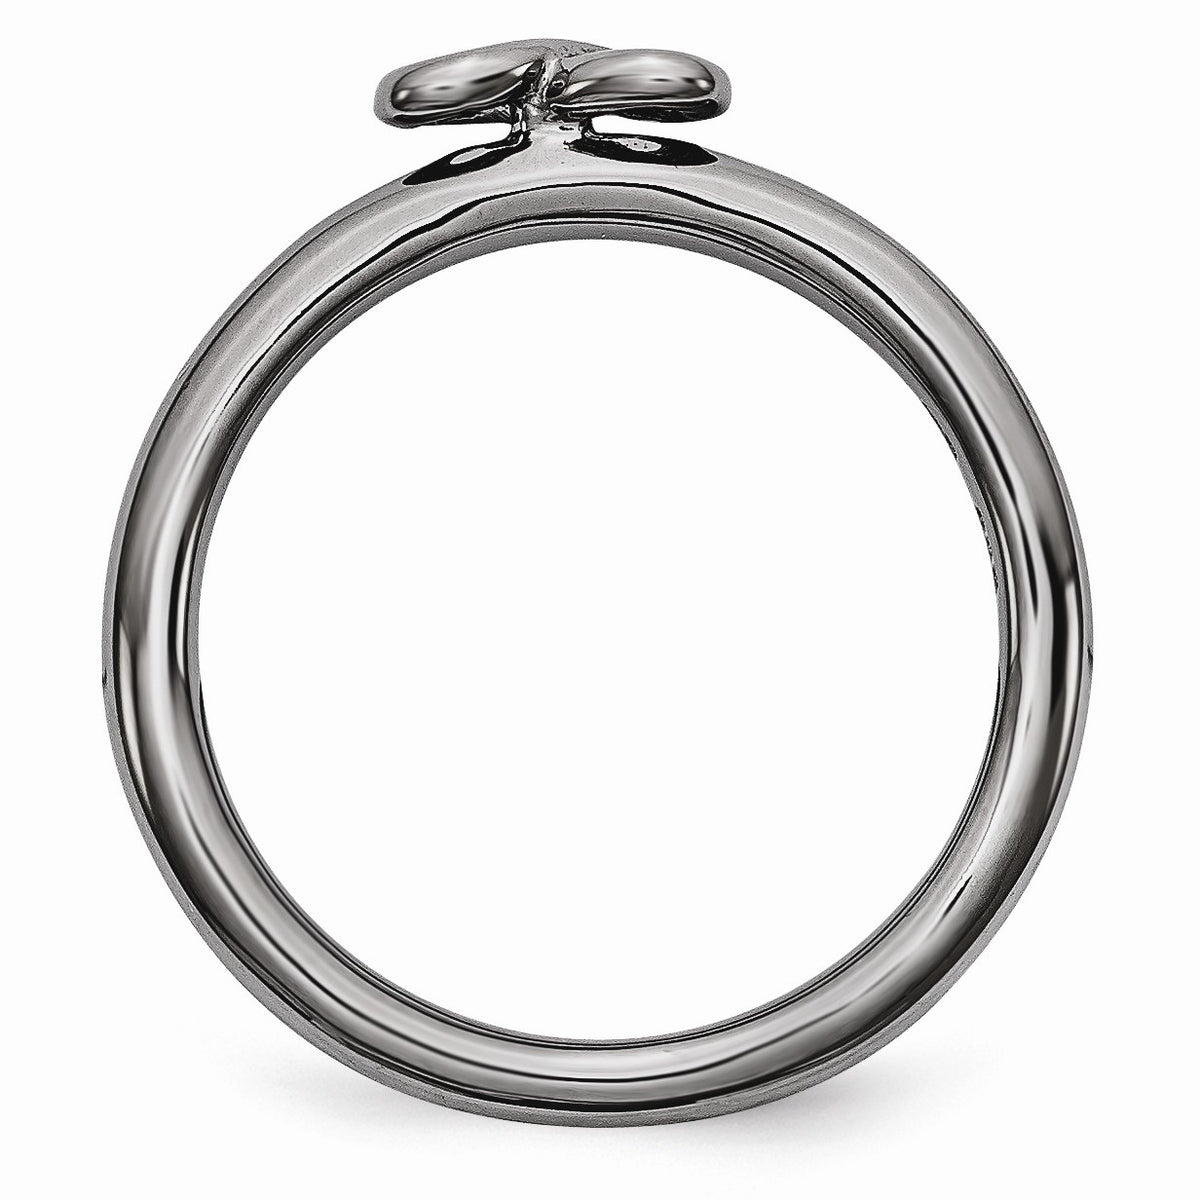 Alternate view of the Black Plated Sterling Silver Stackable 2.5mm Infinity Symbol Ring by The Black Bow Jewelry Co.